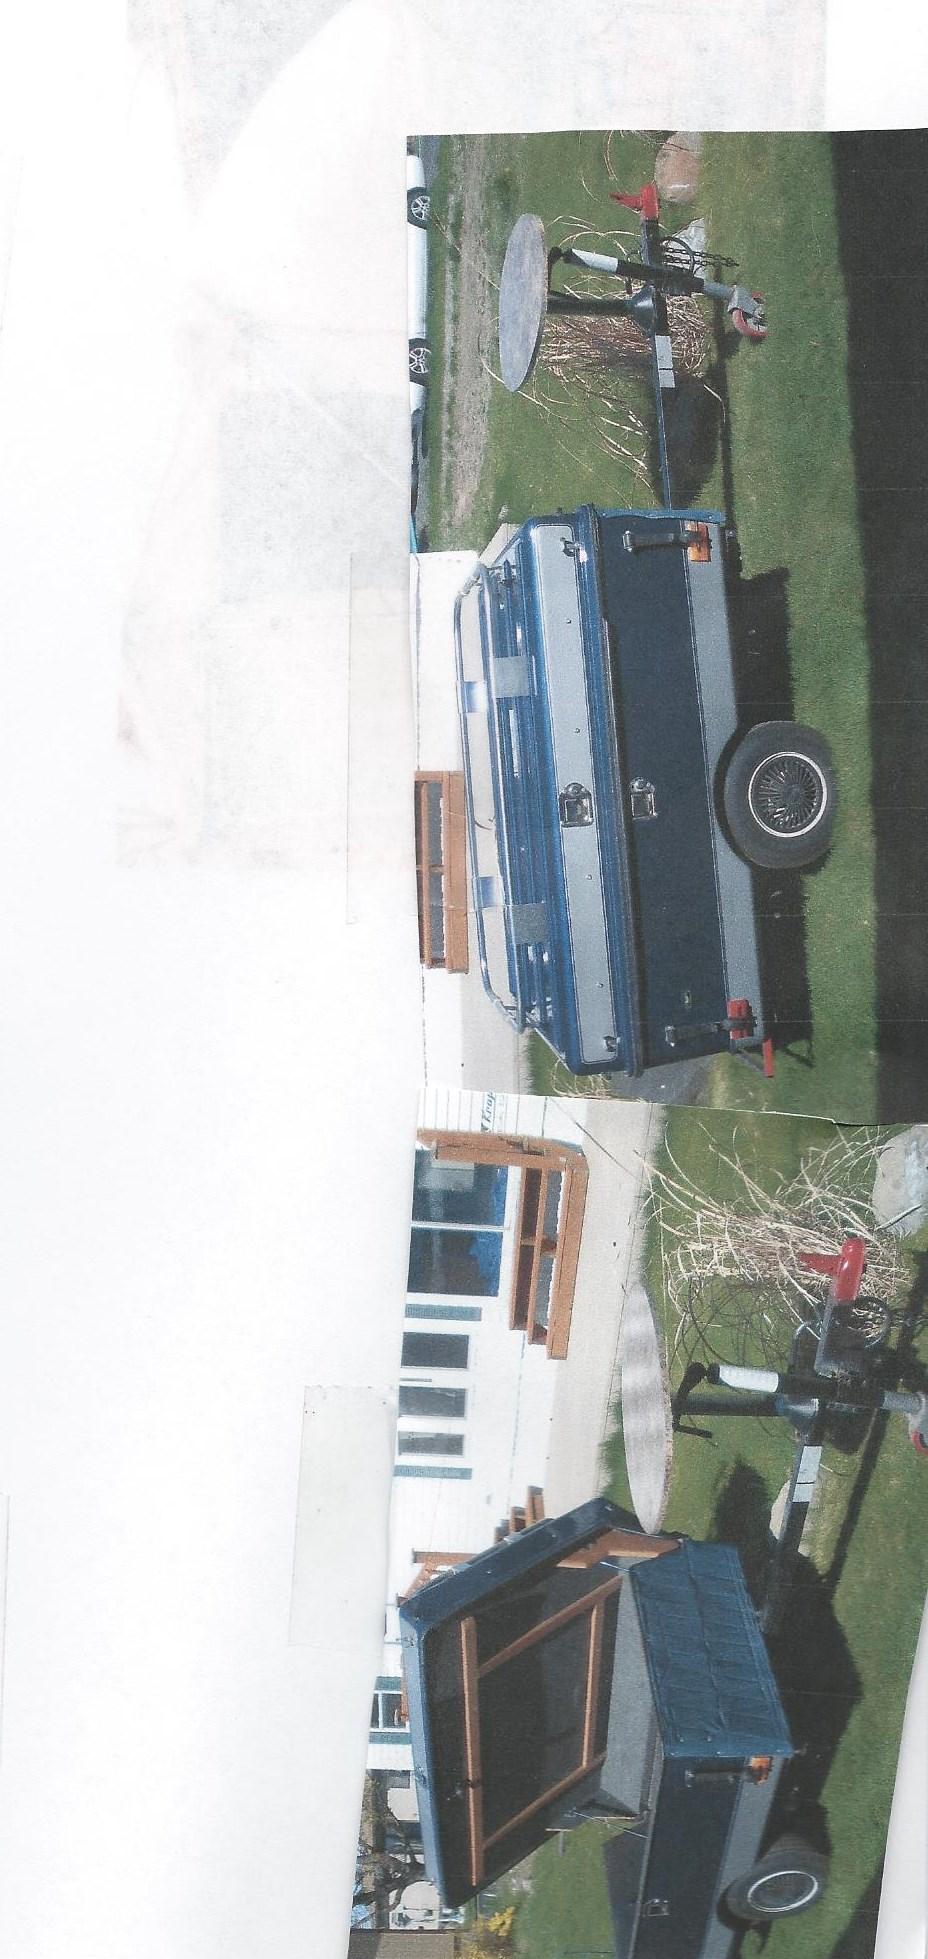 For Sale 2002 Hard top trailer was Tony from B.C...Has table on front and a tongue jack.